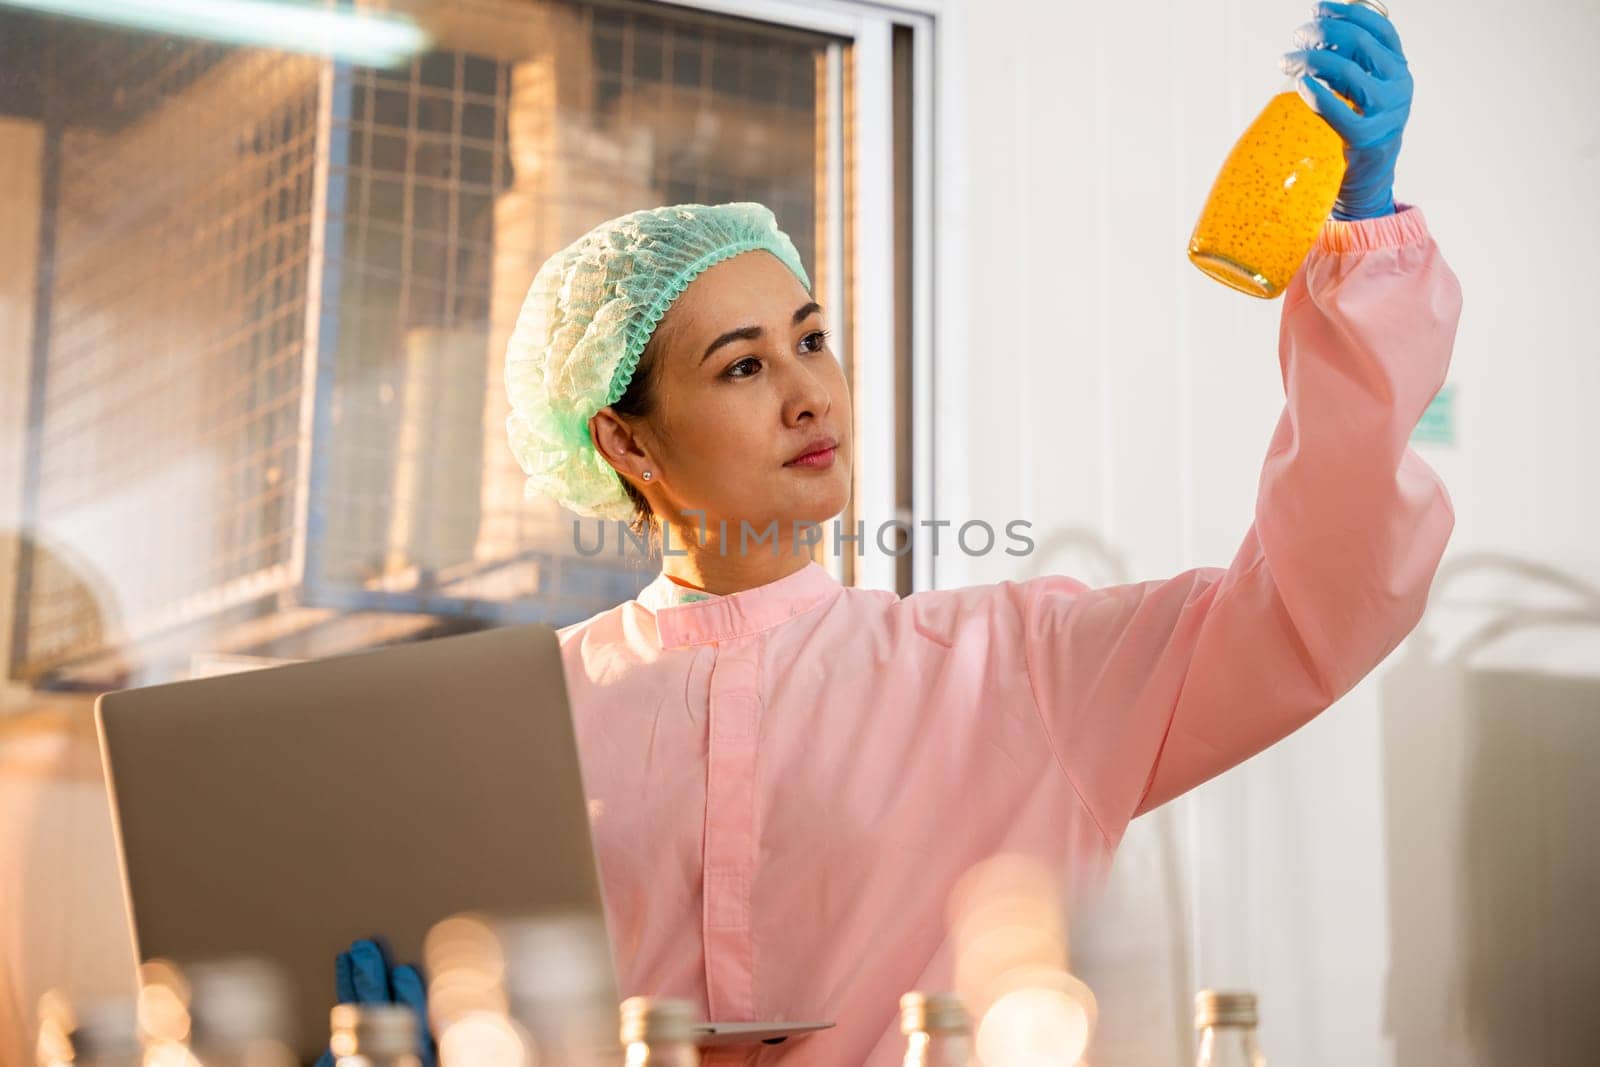 In a beverage factory a woman part of quality control meticulously inspects bottles on a conveyor belt. Using a laptop she ensures liquid quality maintaining industry standards.